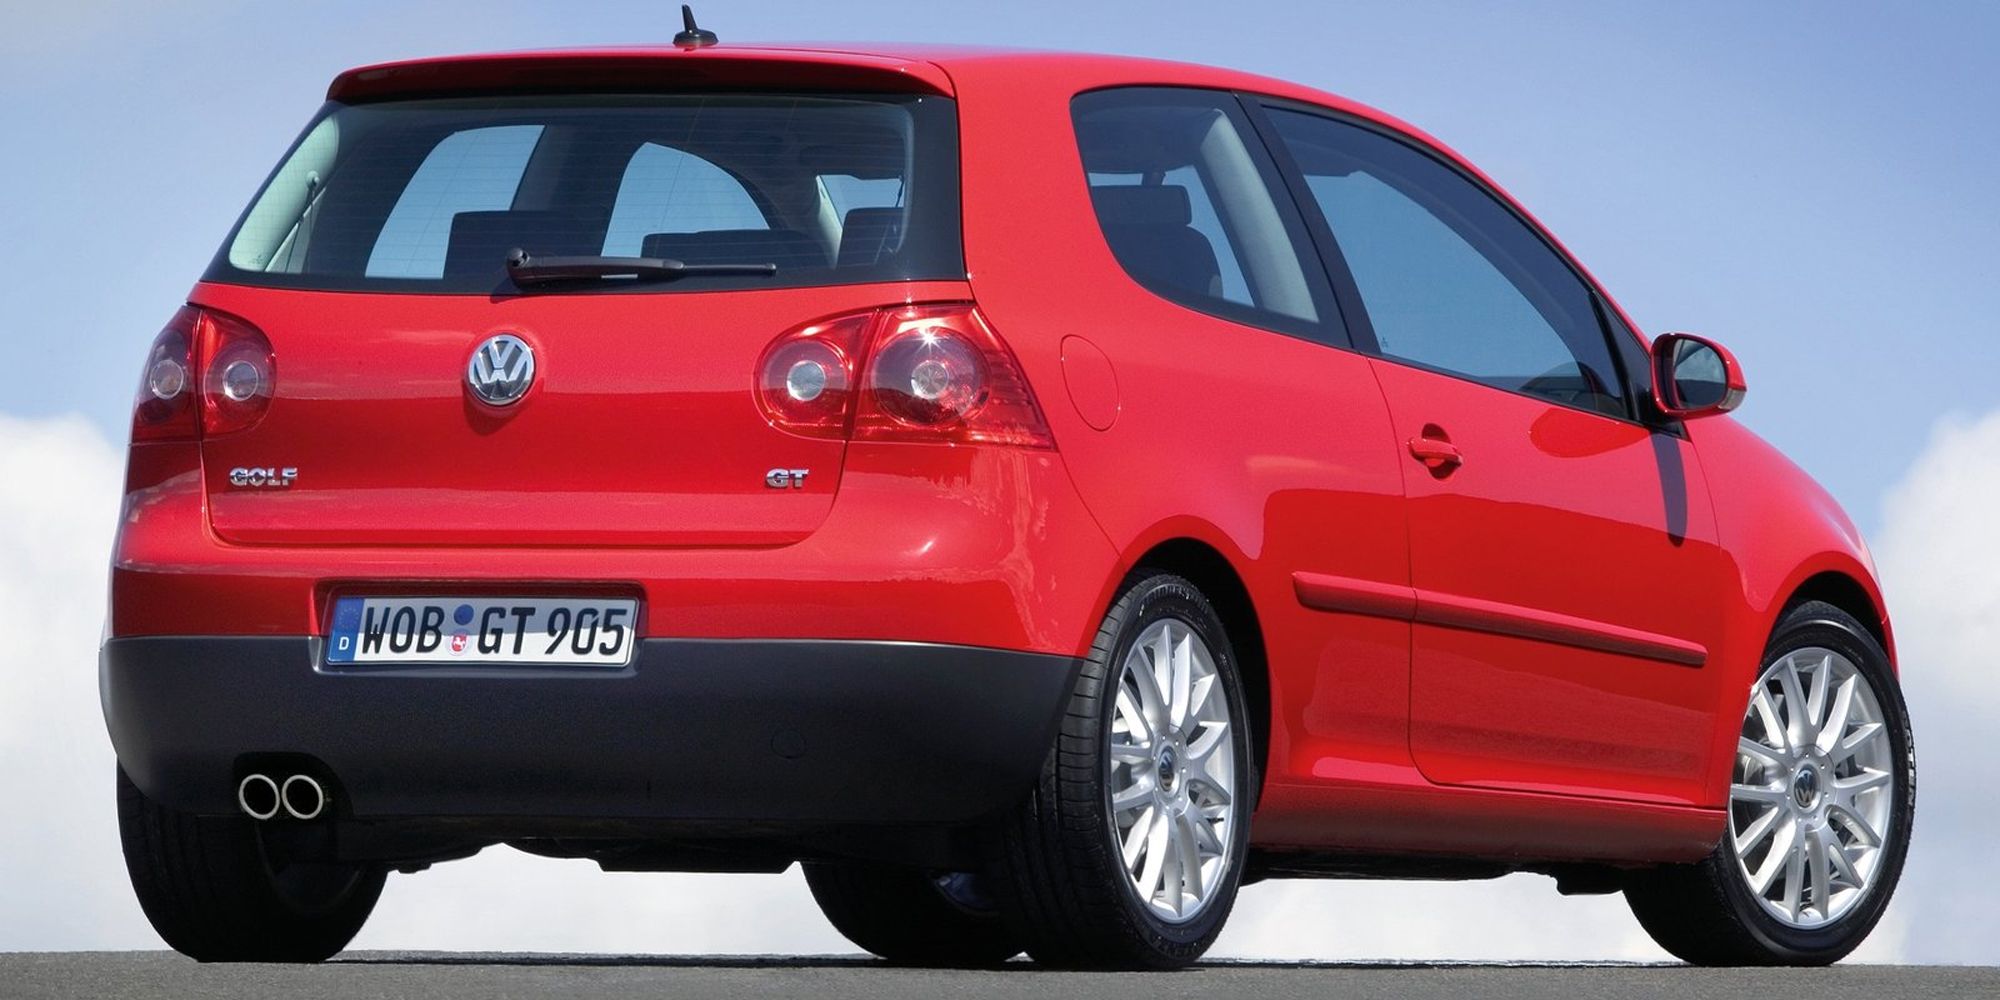 The rear of a red Golf GT